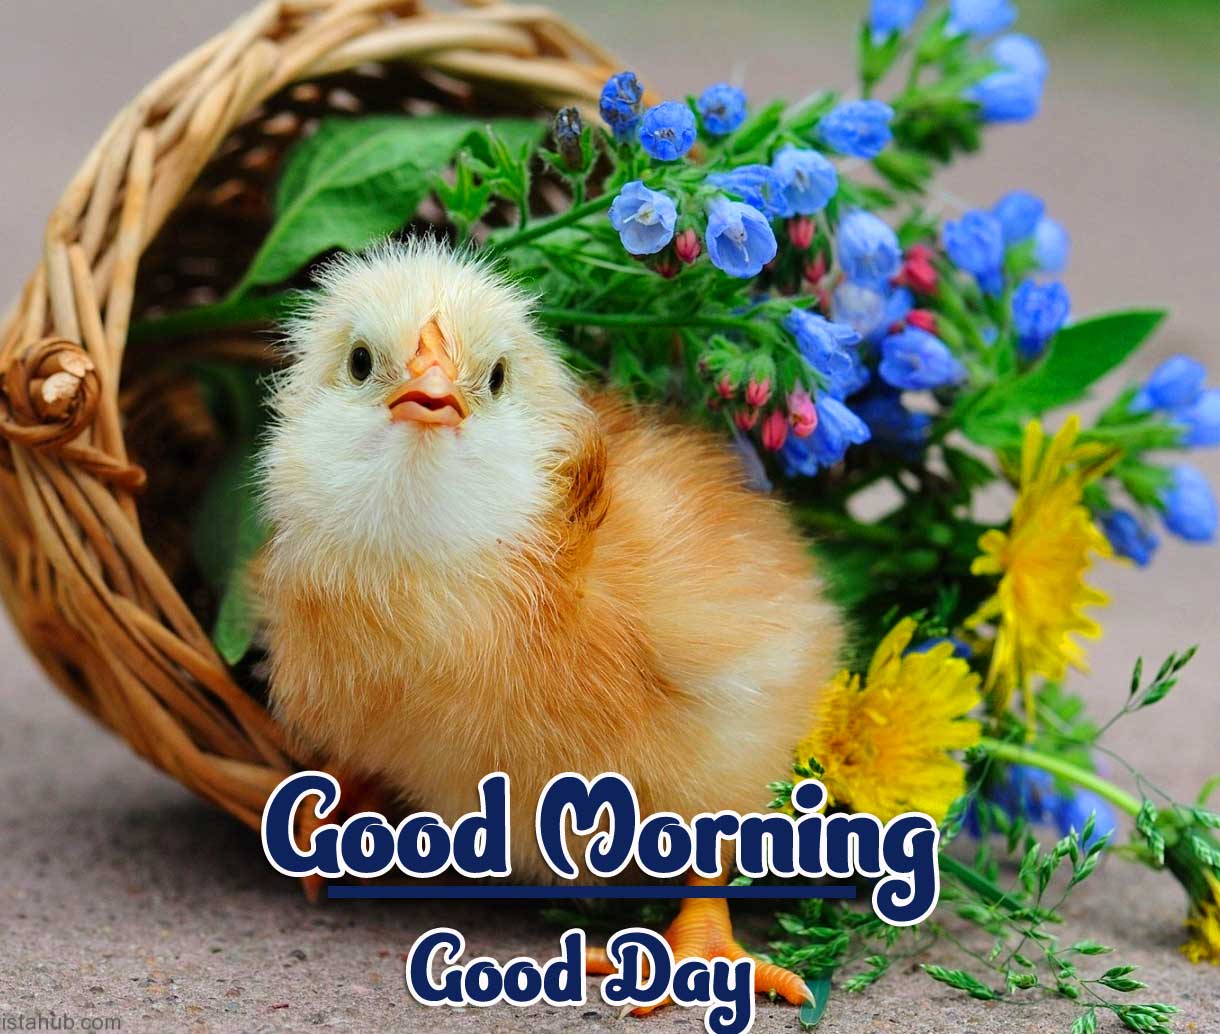 99+ Best Good Morning Images, Wallpaper Pics Download, Morning